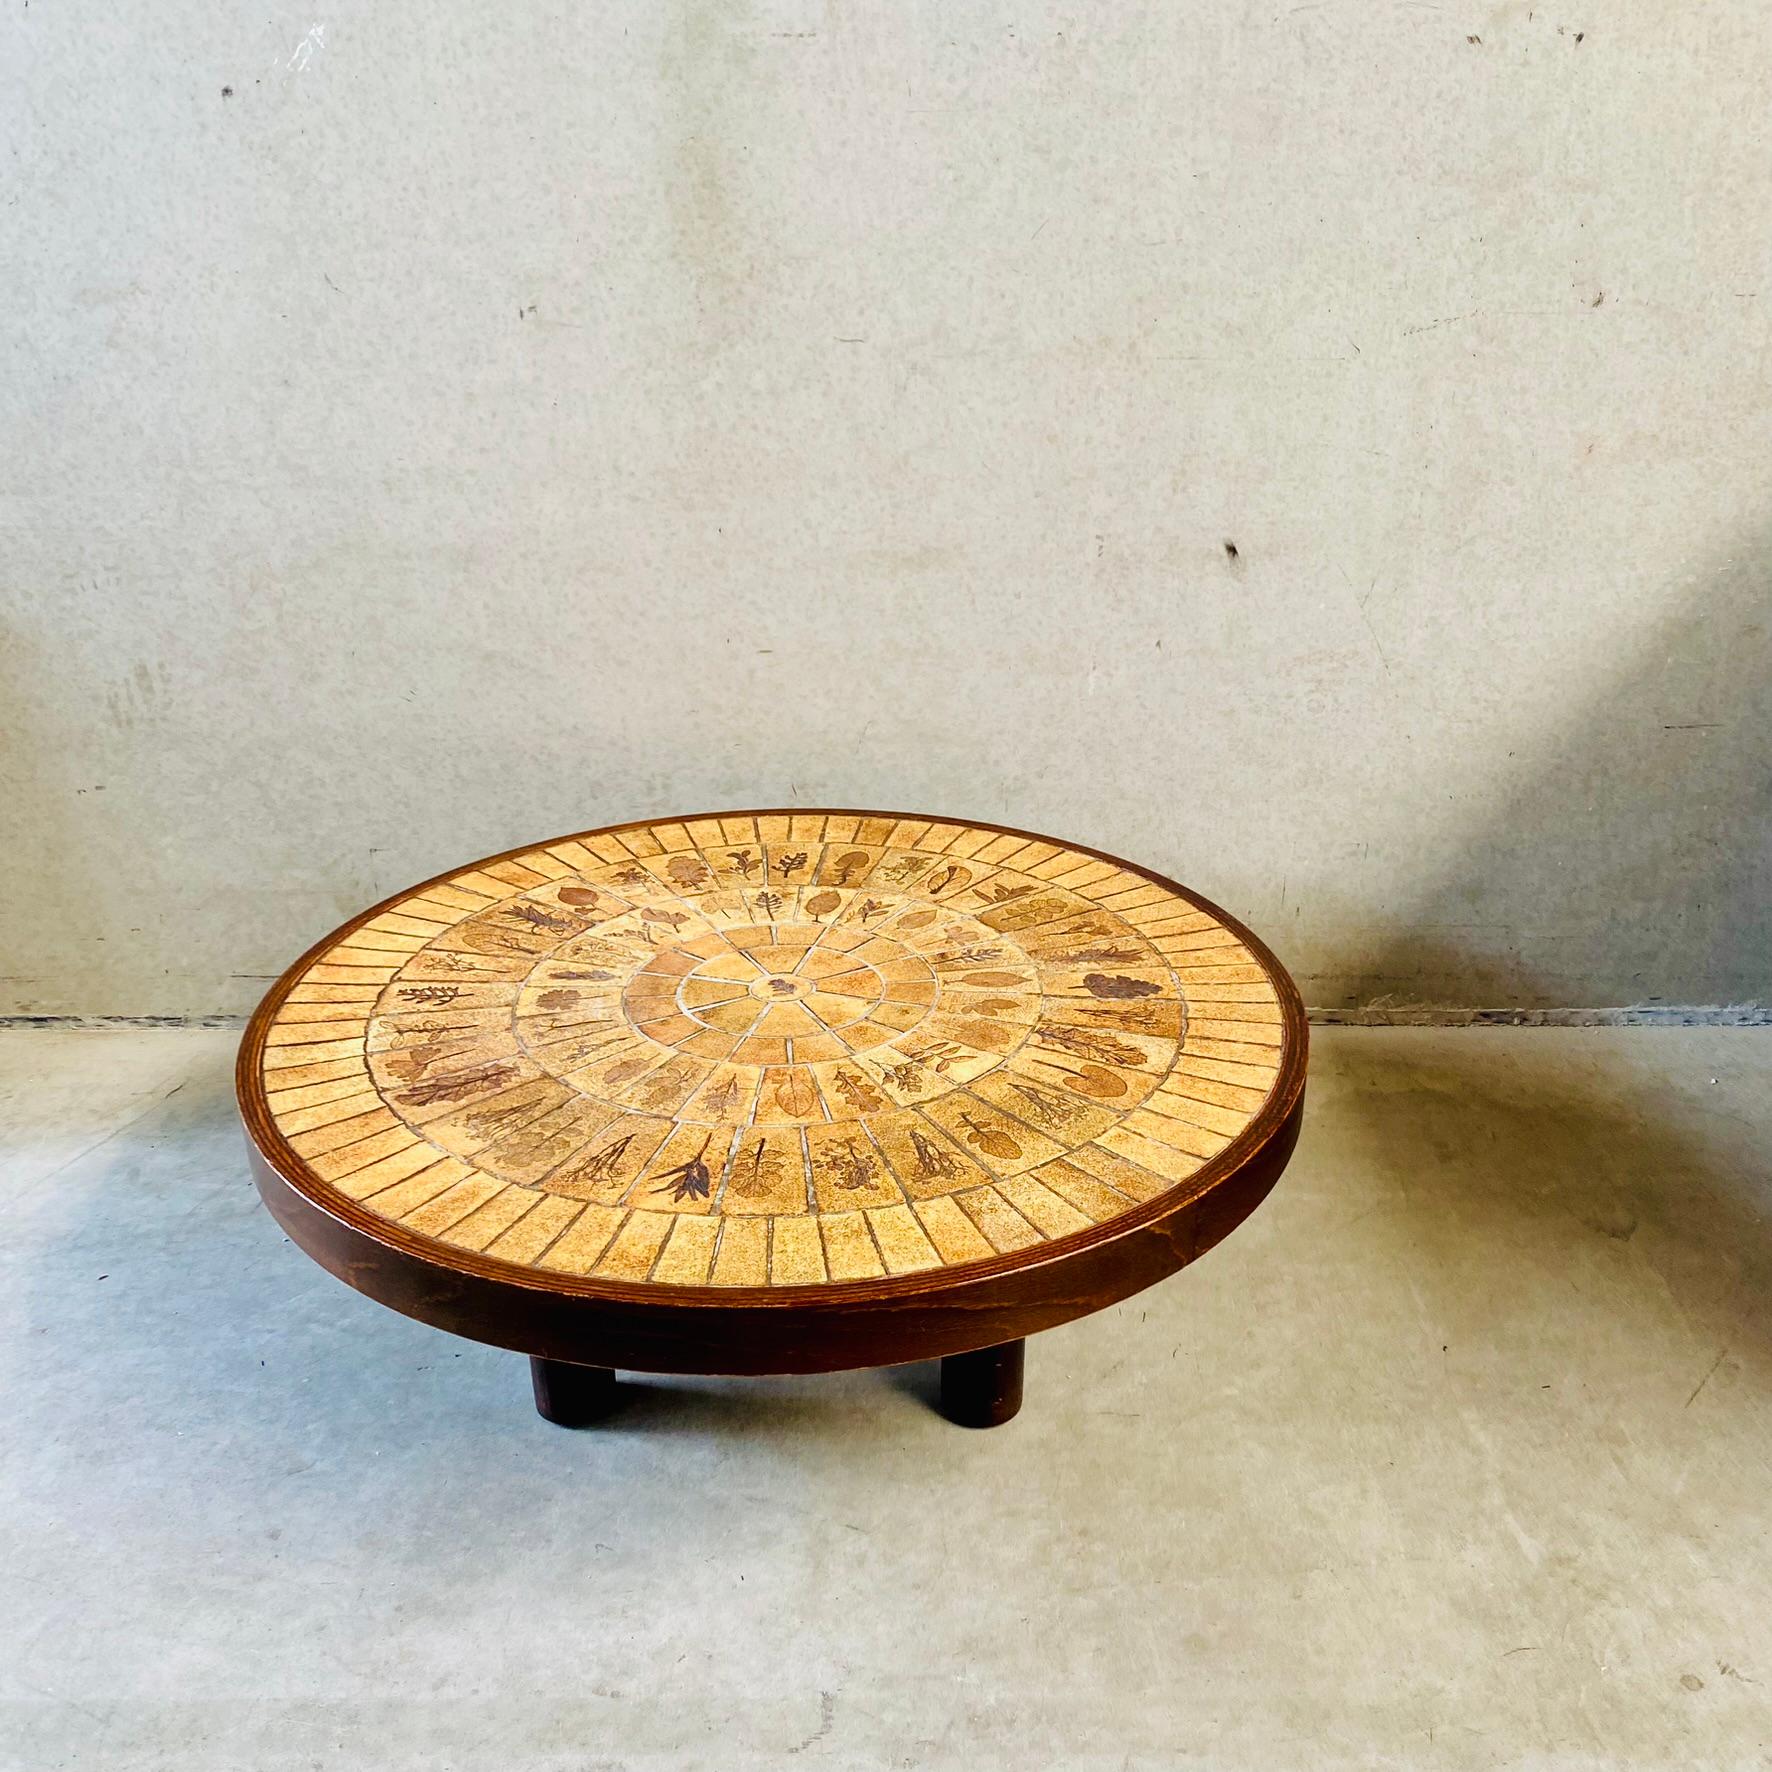 Round Brutalist Ceramic Coffee Table by Roger Capron, France 1960 For Sale 9